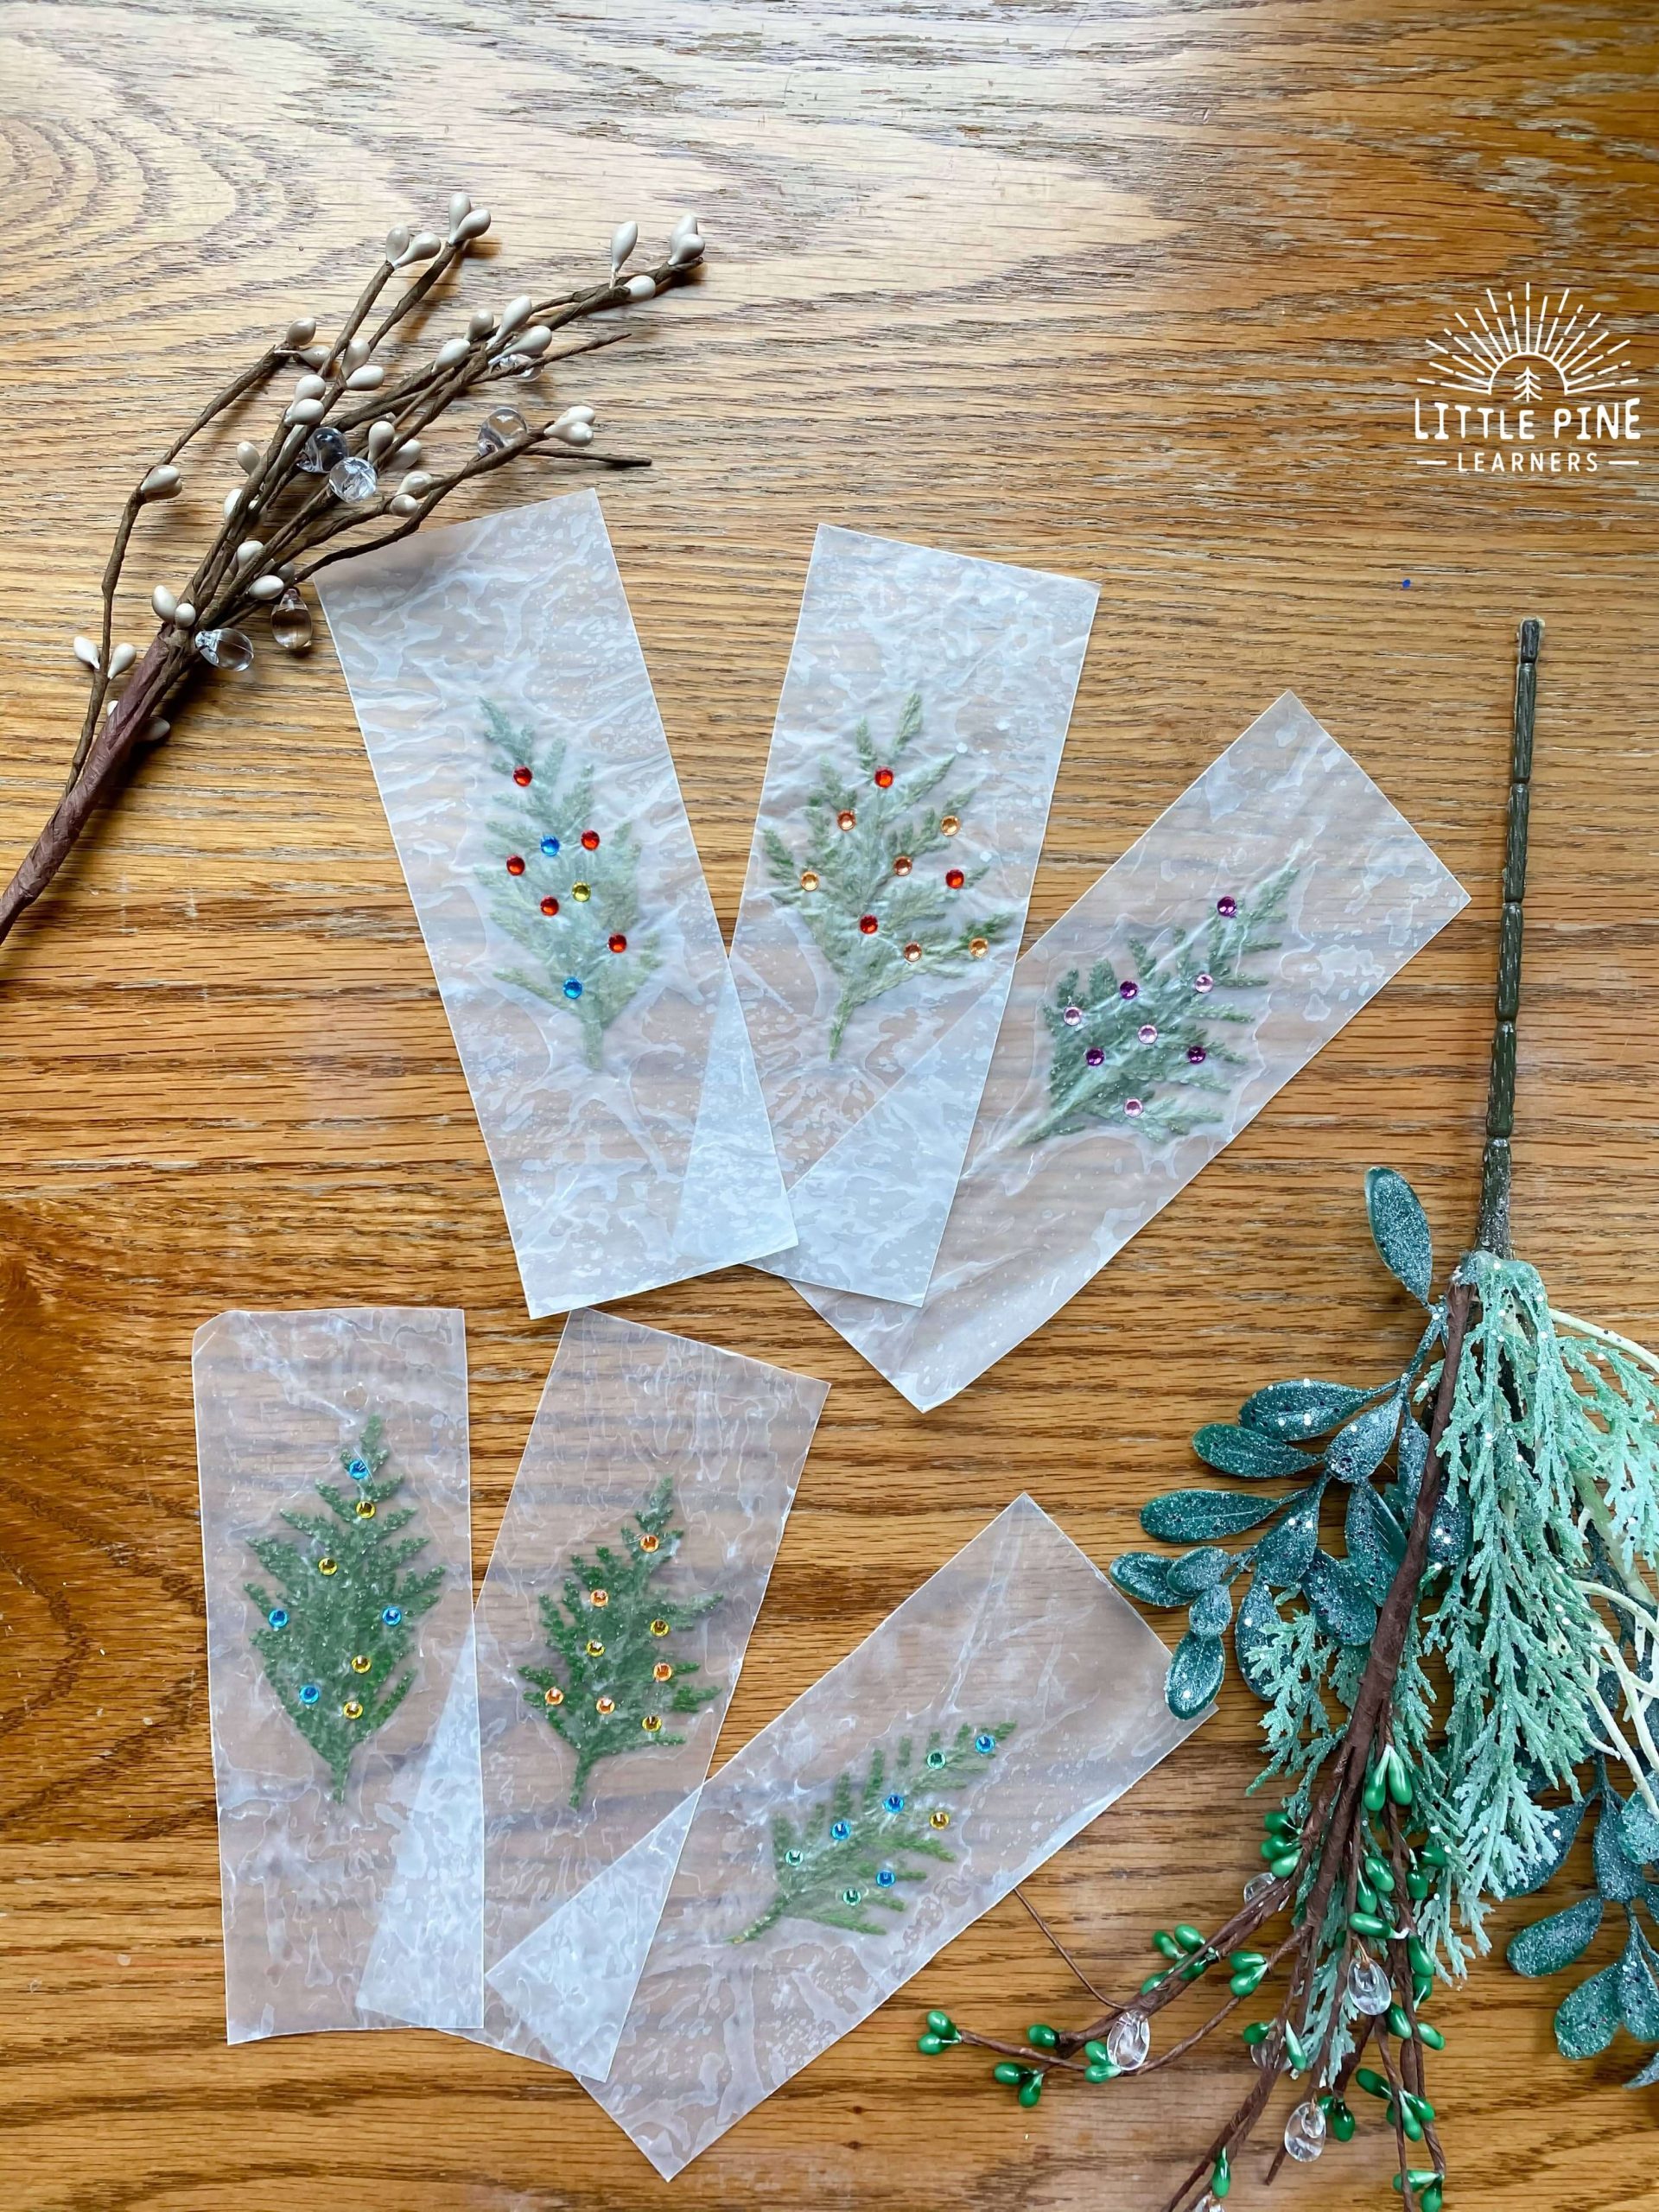 Adorable Bookmark Gift Craft Made With Wax Paper - Creative wax paper bookmark concepts.